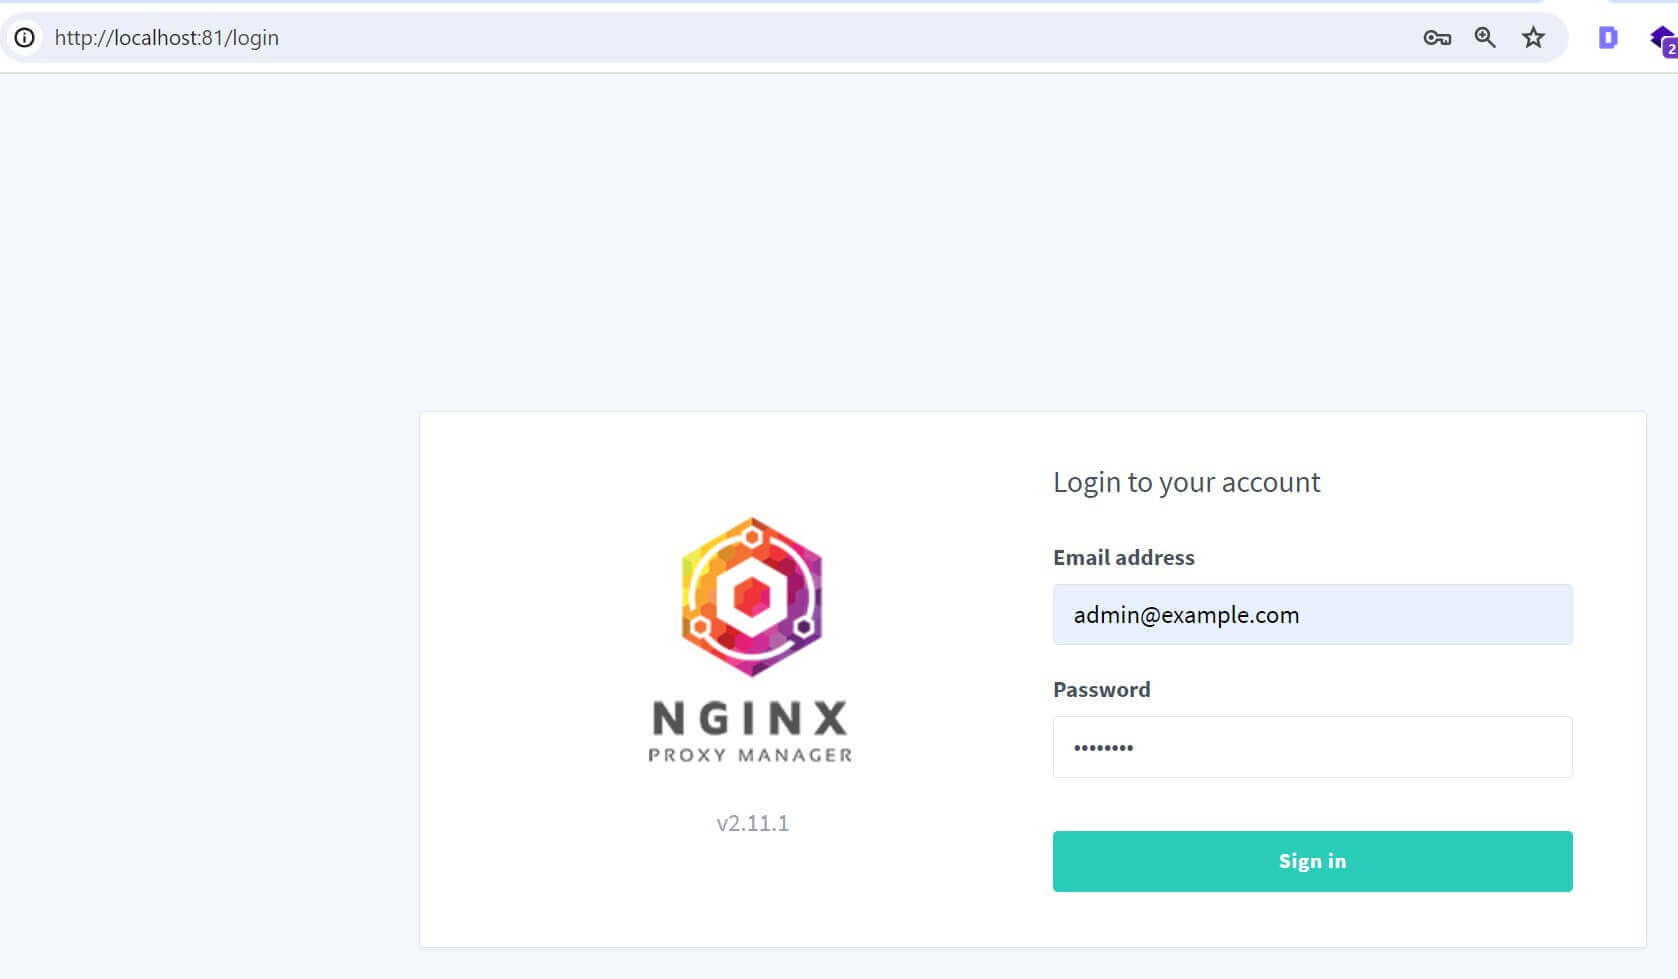 Accessing Nginx Proxy Manager On the Web